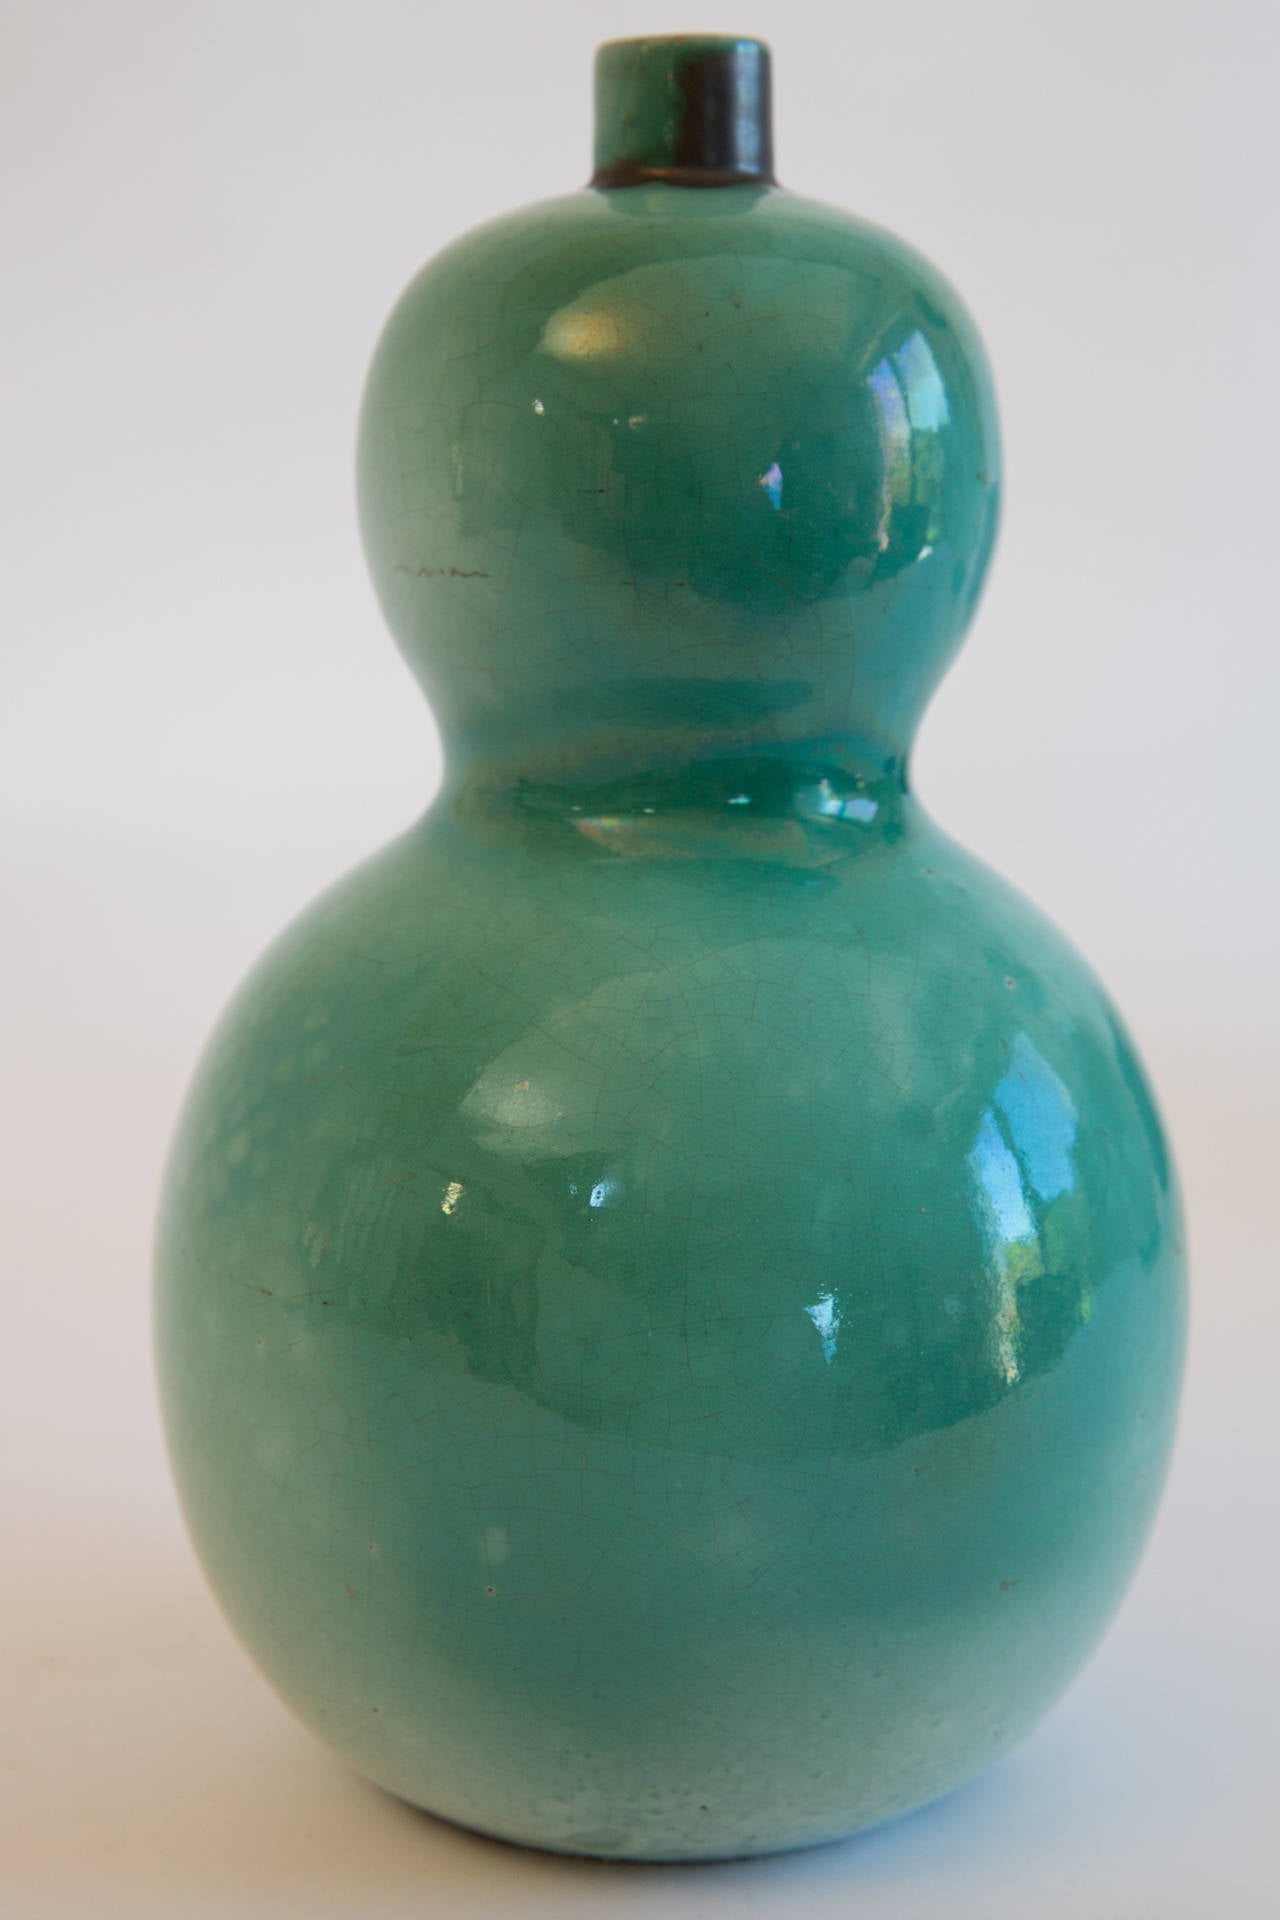 A very classic Chinese inspired double gourd ceramic vase produced in the Bordeaux workshop for Atelier Primavera ( France 1925).
Please refer to the PRIMAVERA book recently published as well as to the Galerie Anne Sophie Duval